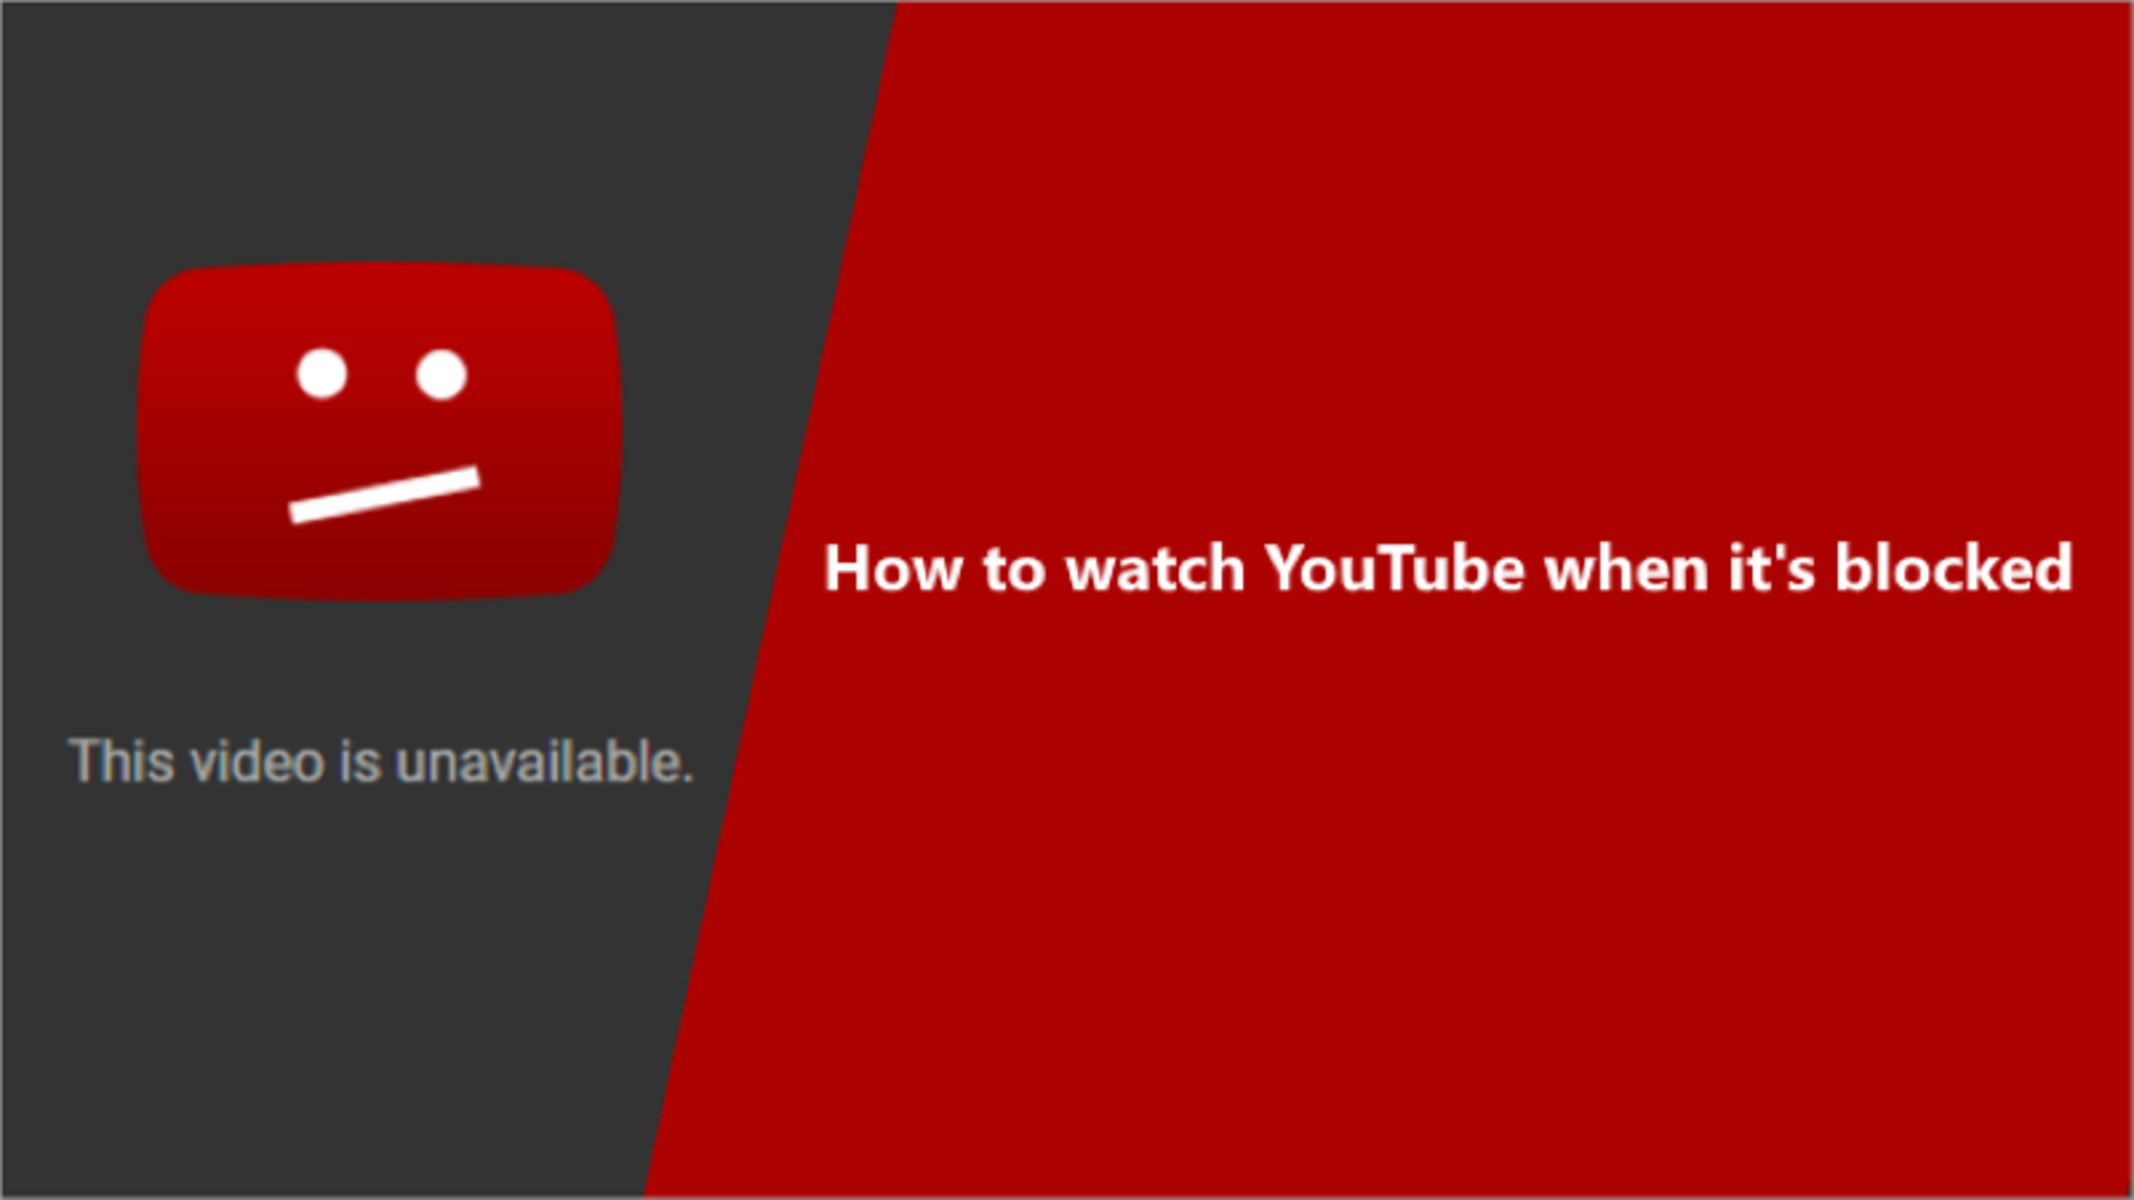 How To Watch Youtube When Its Blocked